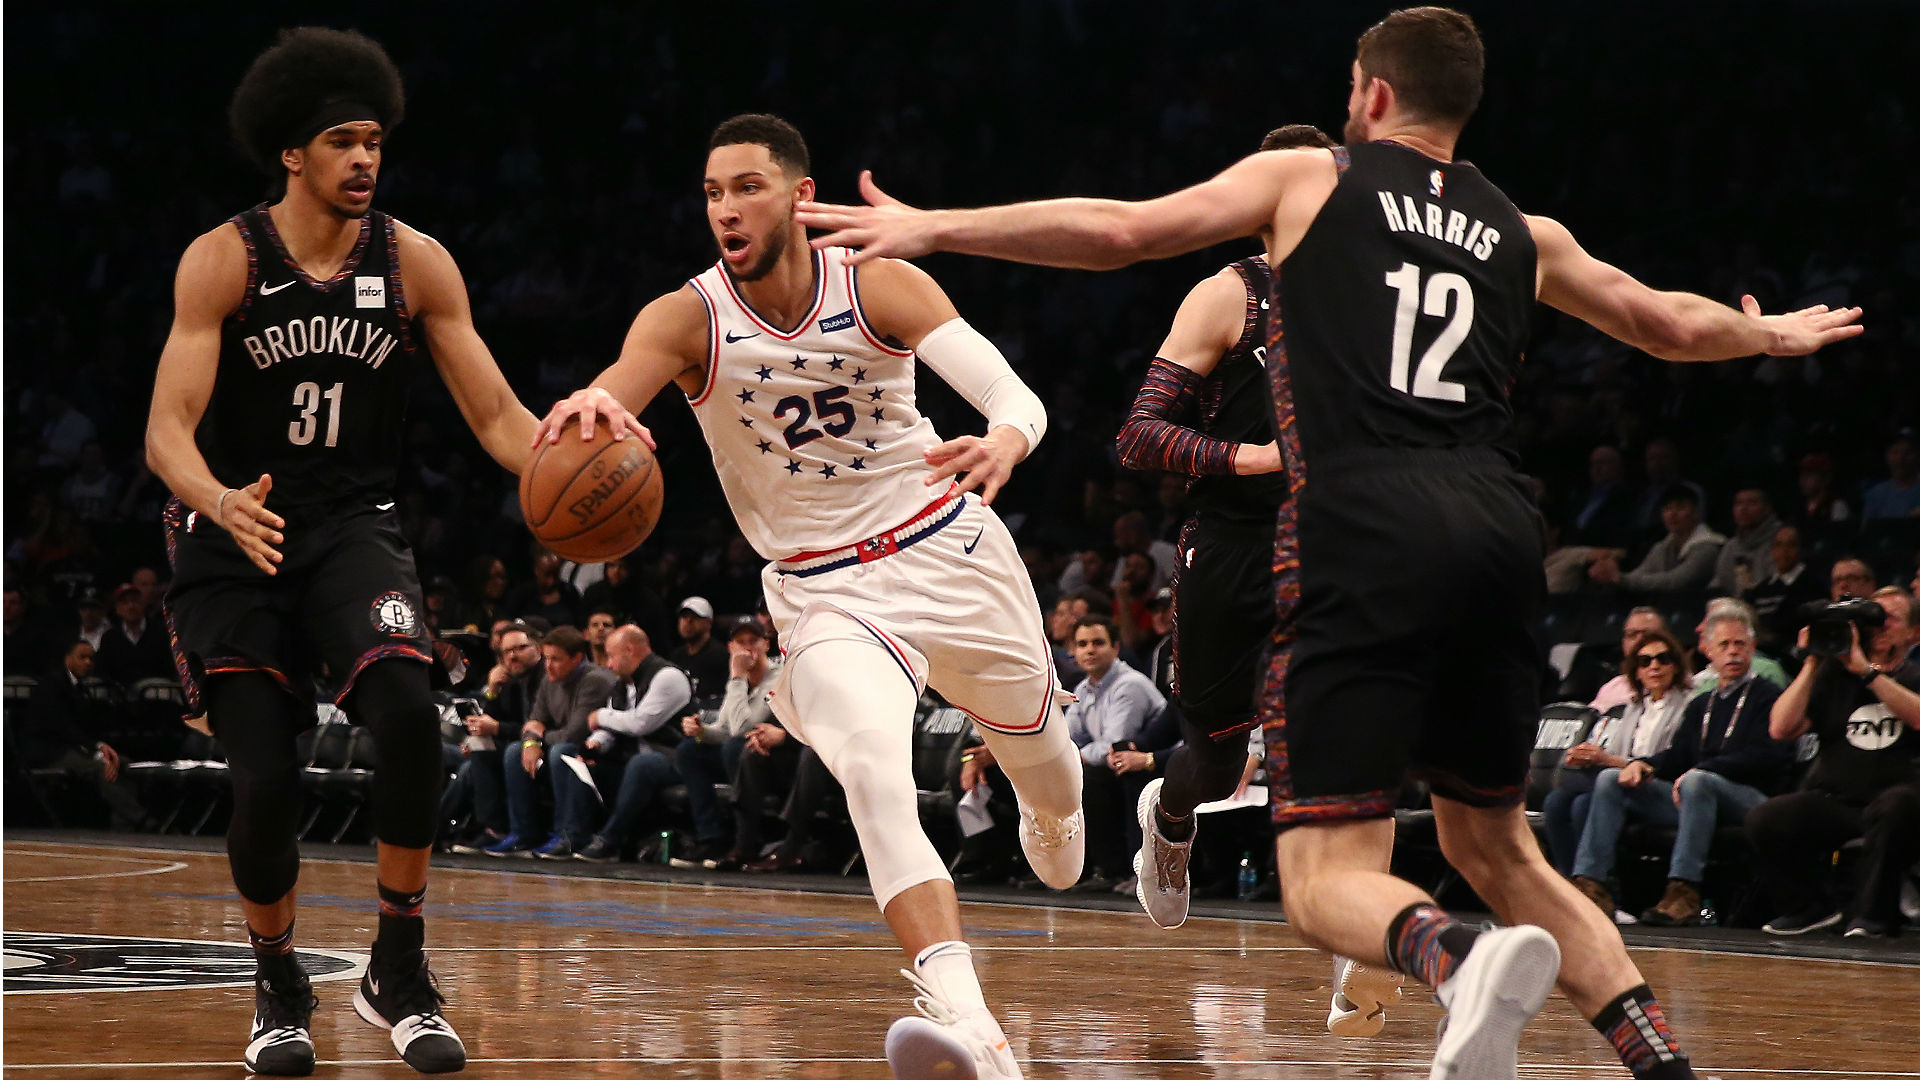 Even without Joel Embiid, the Philadelphia 76ers were too good for the Brooklyn Nets.